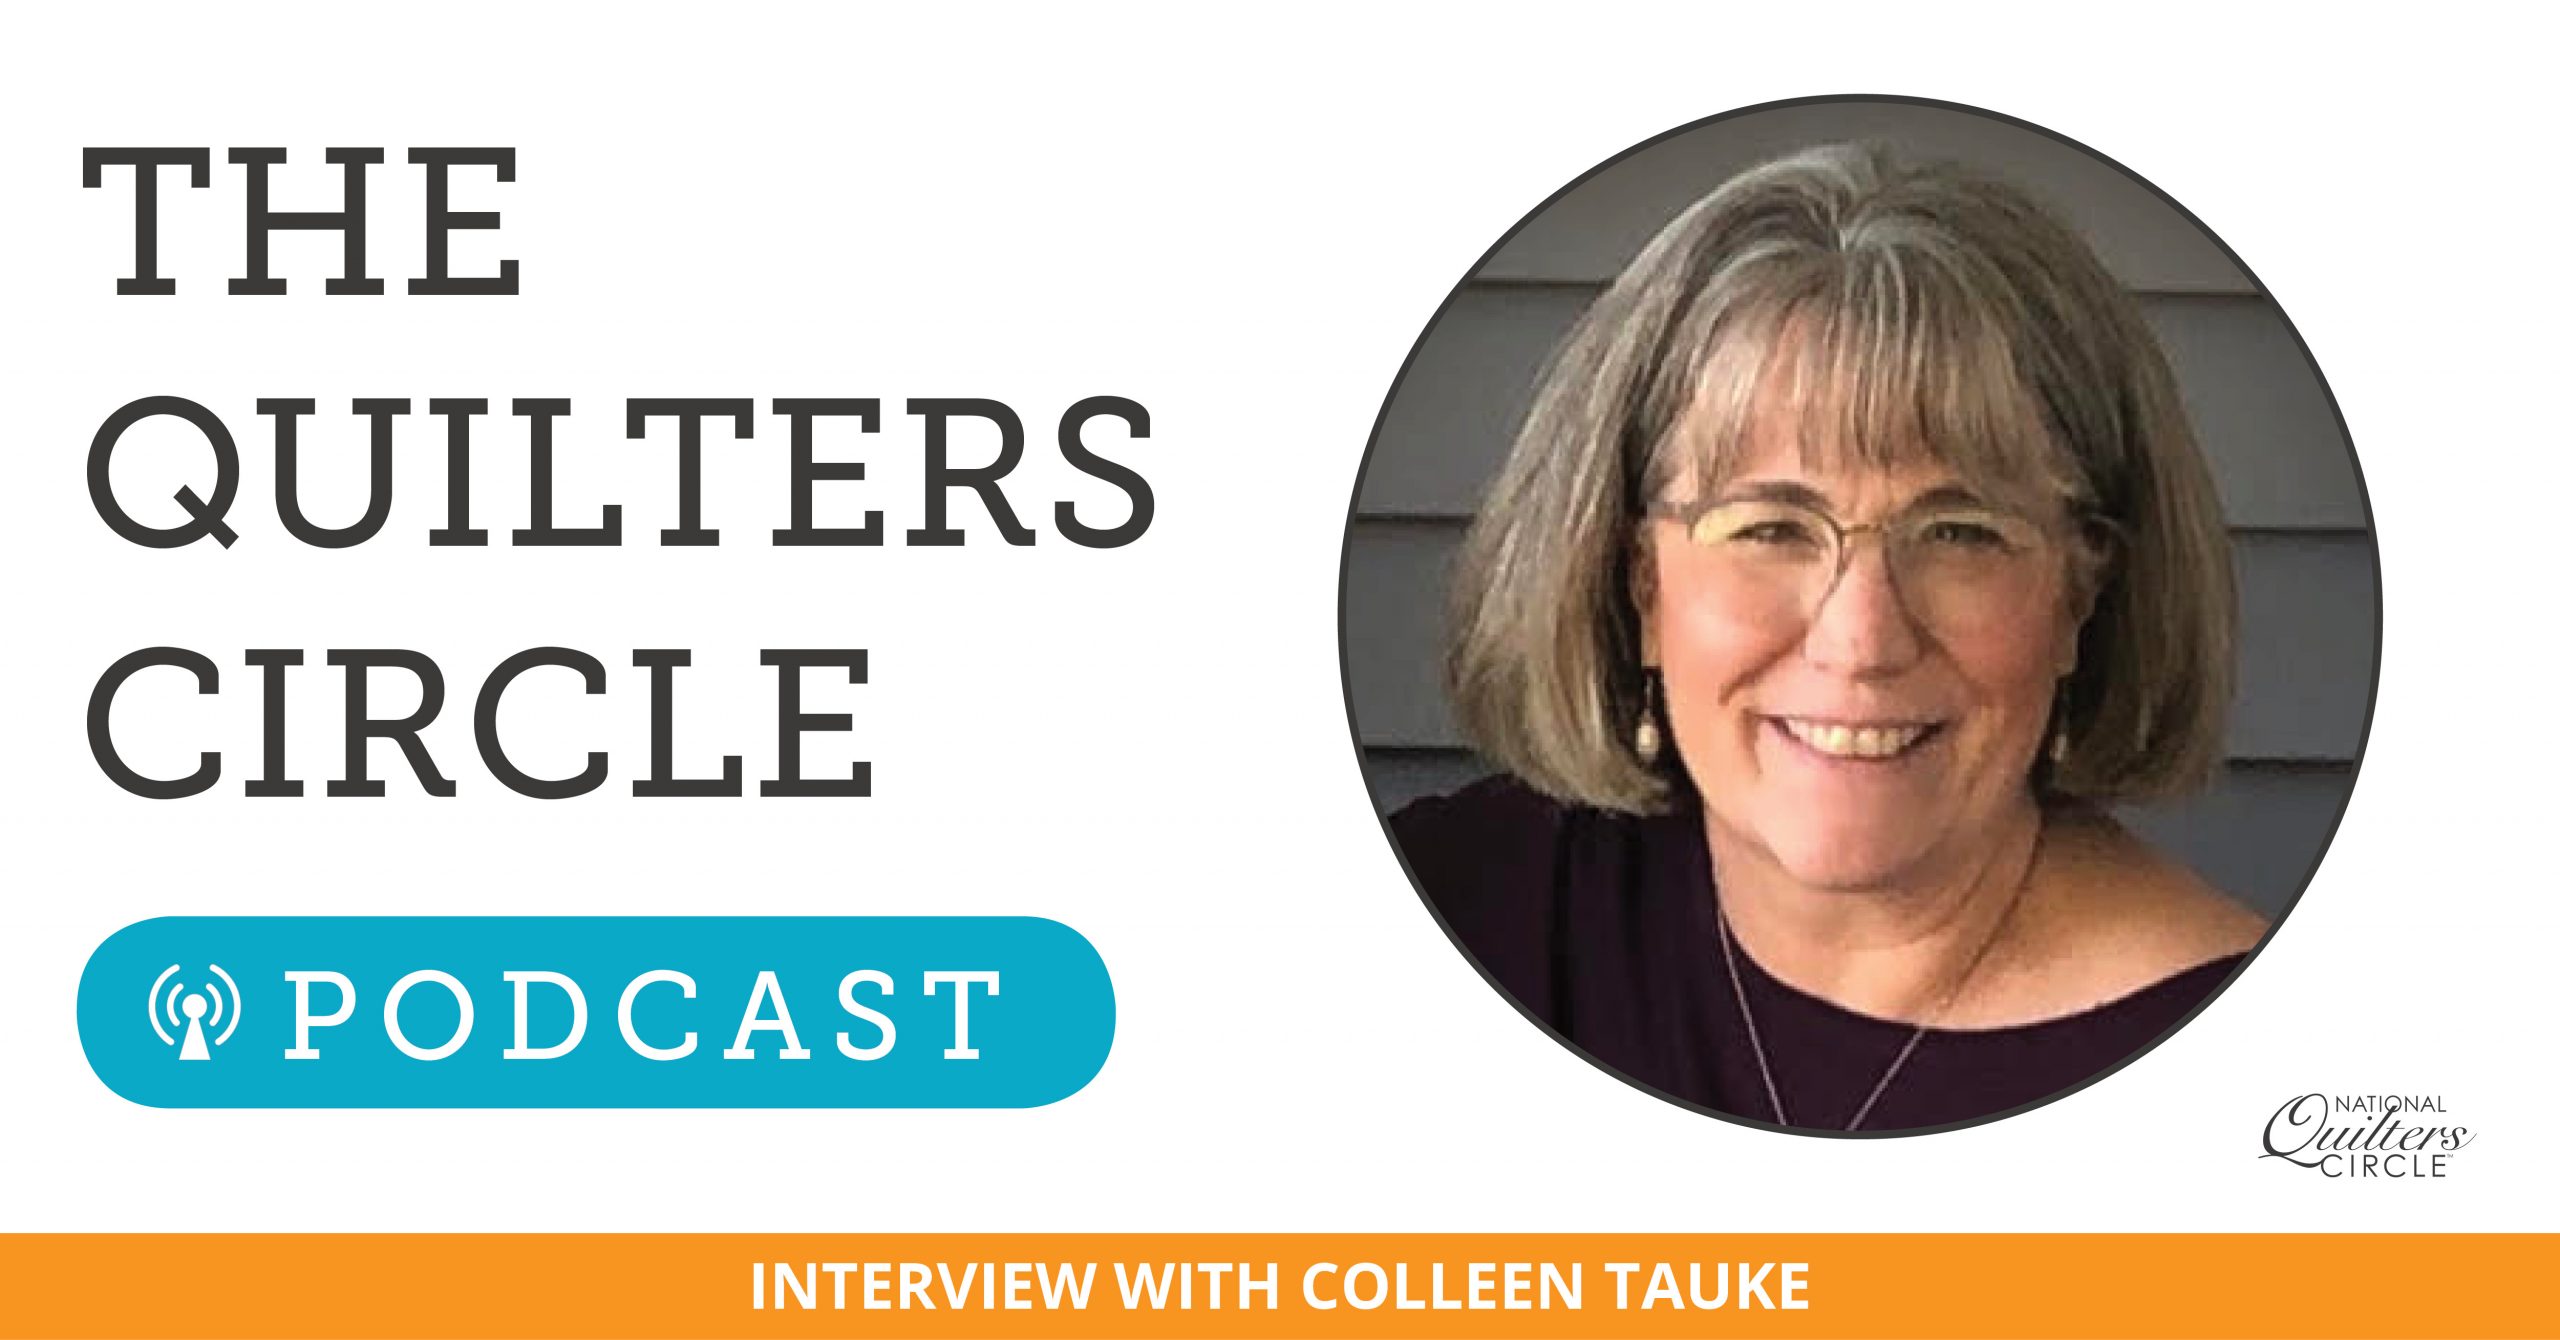 The Quilters Circle Podcast text with a woman smiling